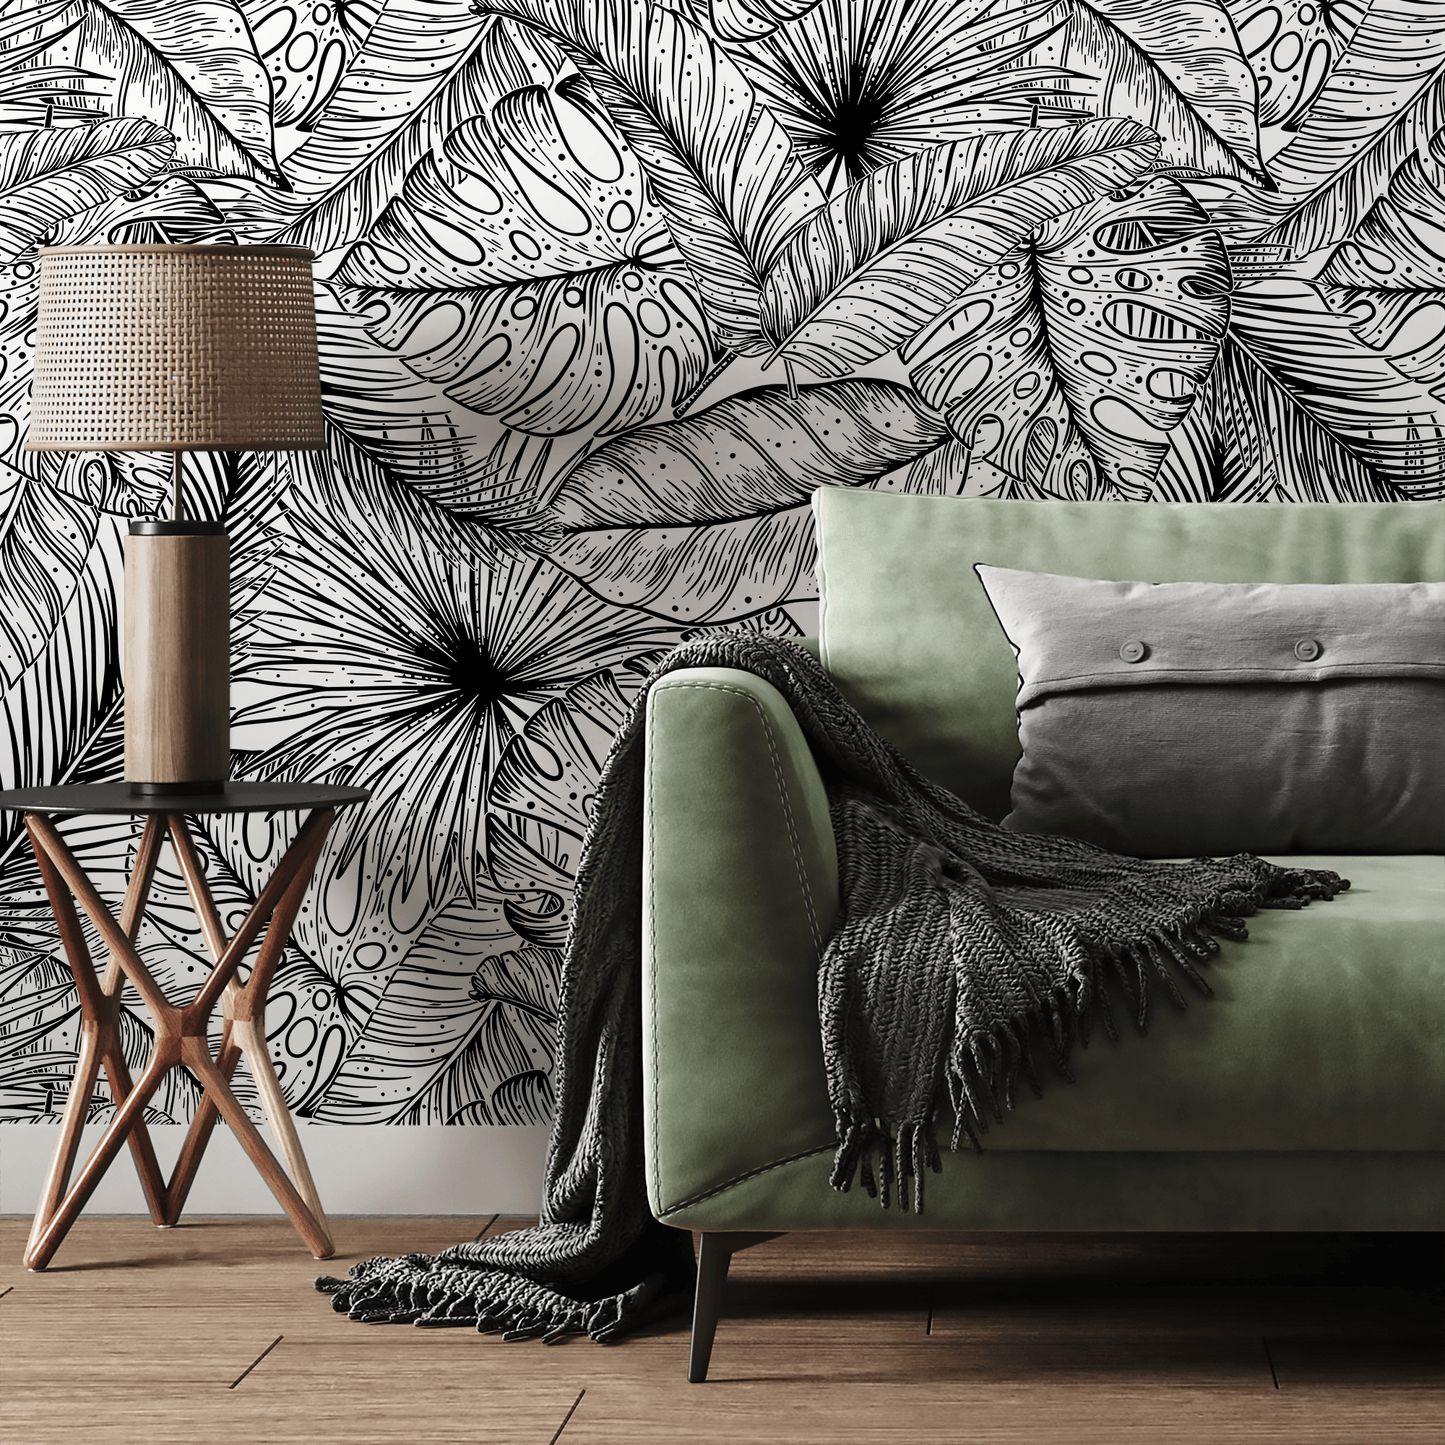 Black and White Wallpaper Tropical Leaves Wallpaper Peel and Stick and Traditional Wallpaper - A535